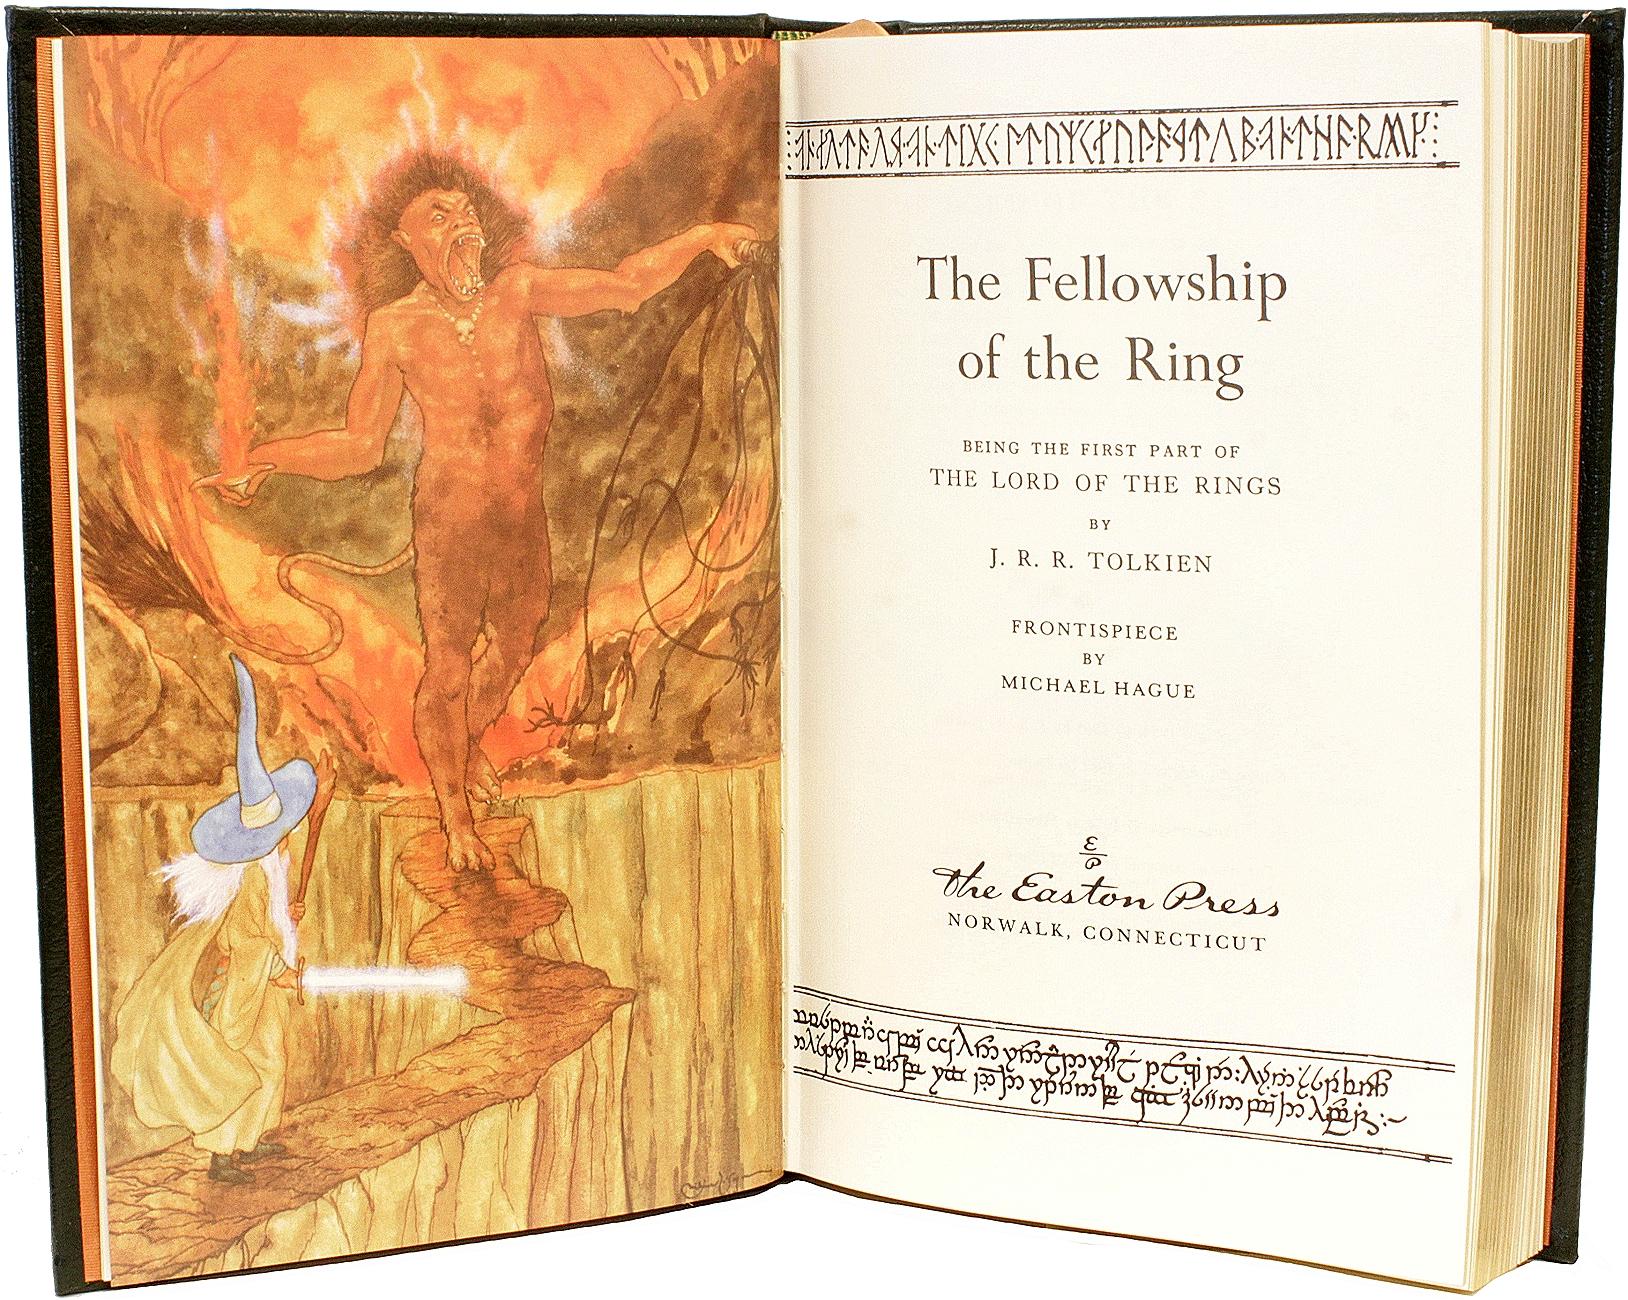 AUTHOR: TOLKIEN, J. R. R. 

TITLE: The Lord Of The Rings. (The Fellowship Of The Ring - The Two Towers - The Return Of The King).

PUBLISHER: Norwak, CT: The Easton Press, 1984.

DESCRIPTION: 3 vols., 8-7/8